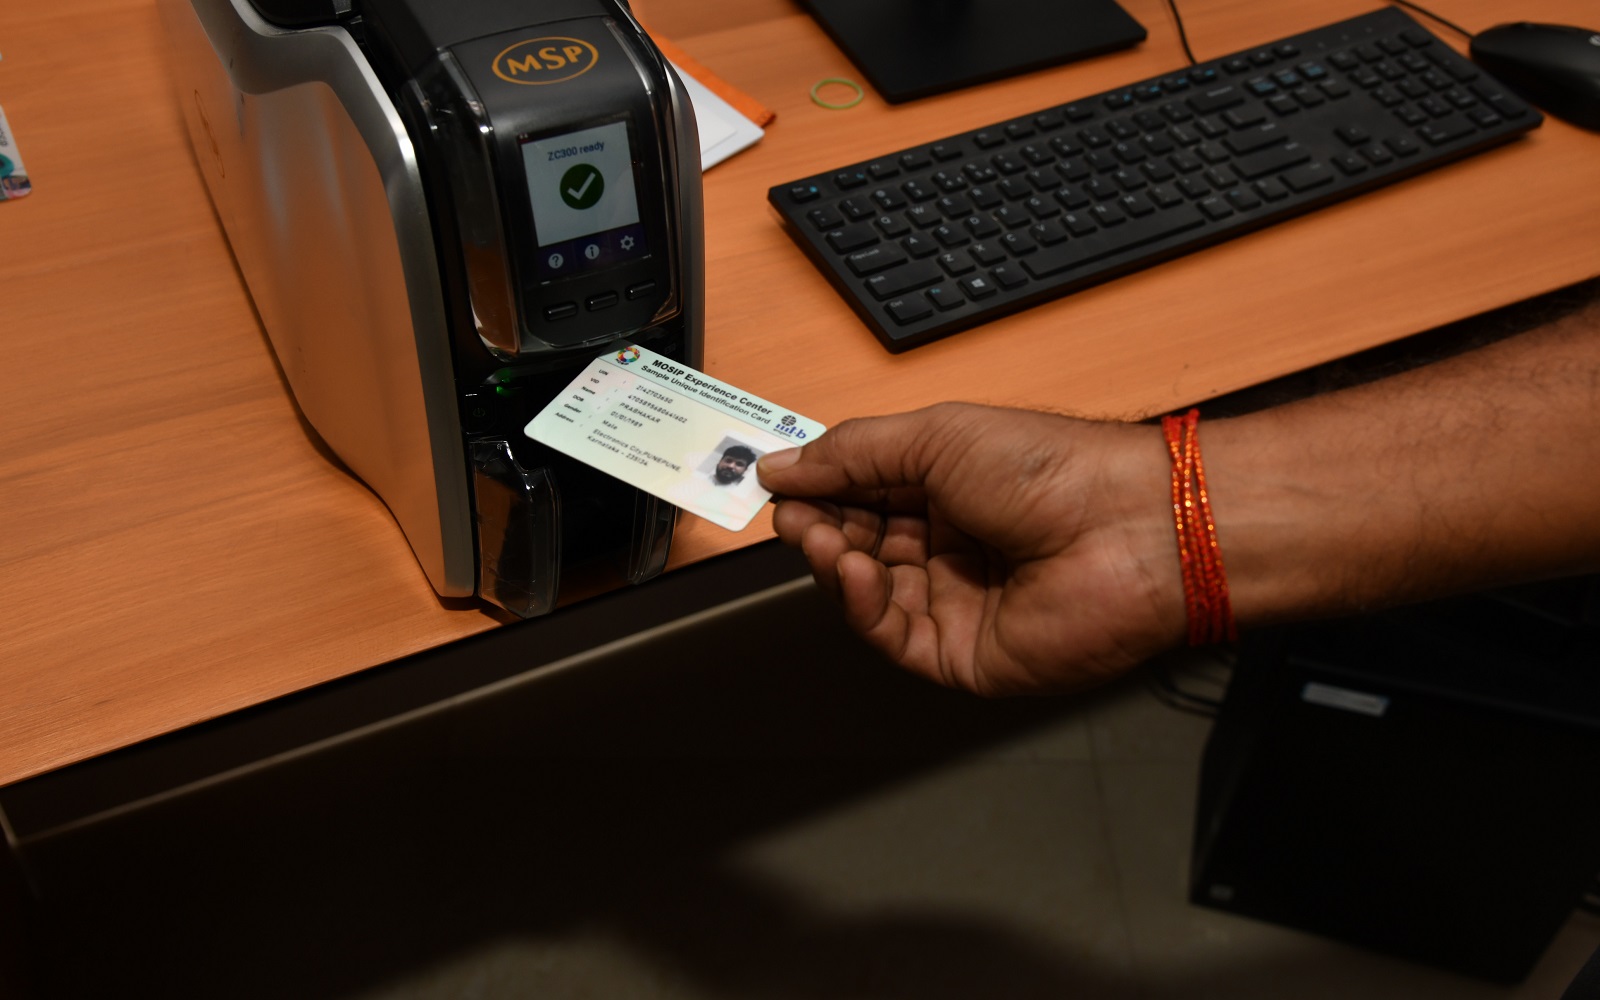 World Bank must protect human rights in digital ID systems